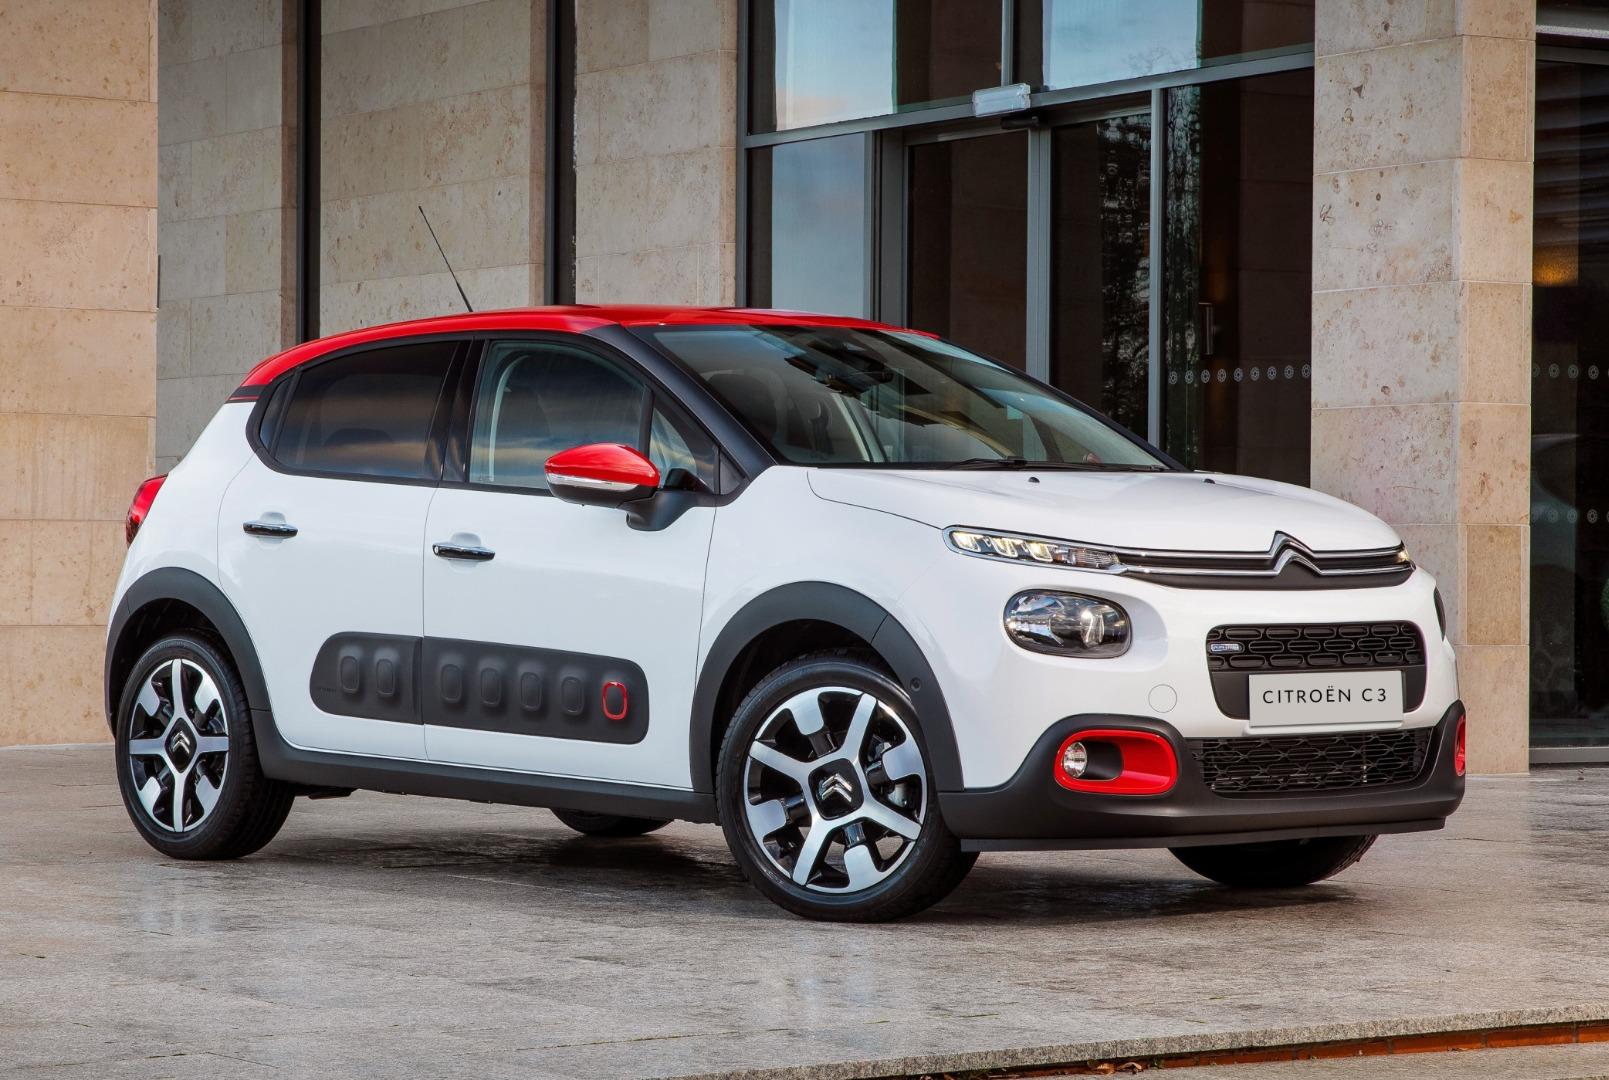 Is The Citroën C3 Good For New Drivers? - Buying A Car - Autotrader